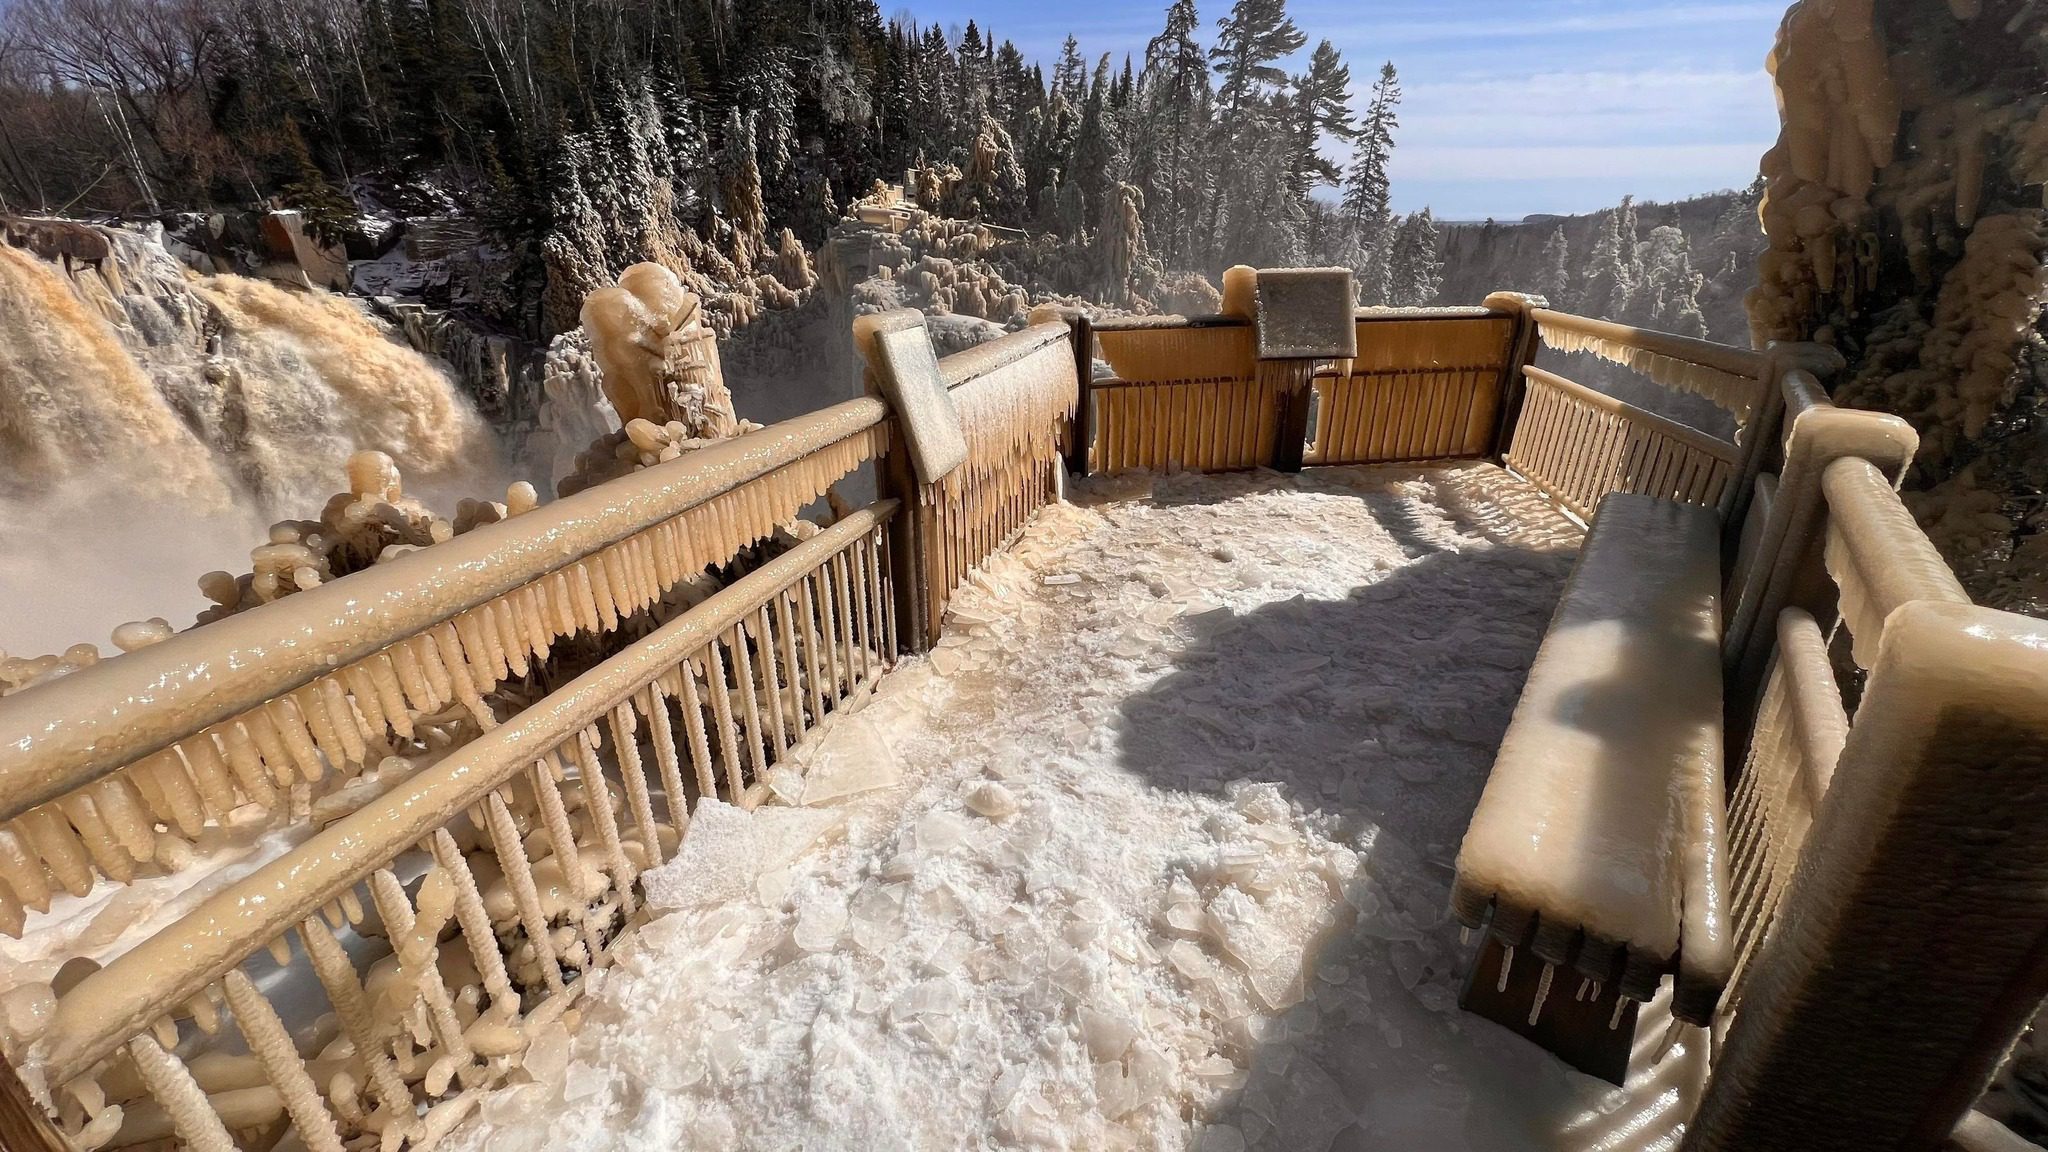 The High Falls viewing platform at Grand Portage State Park is coated in ice.